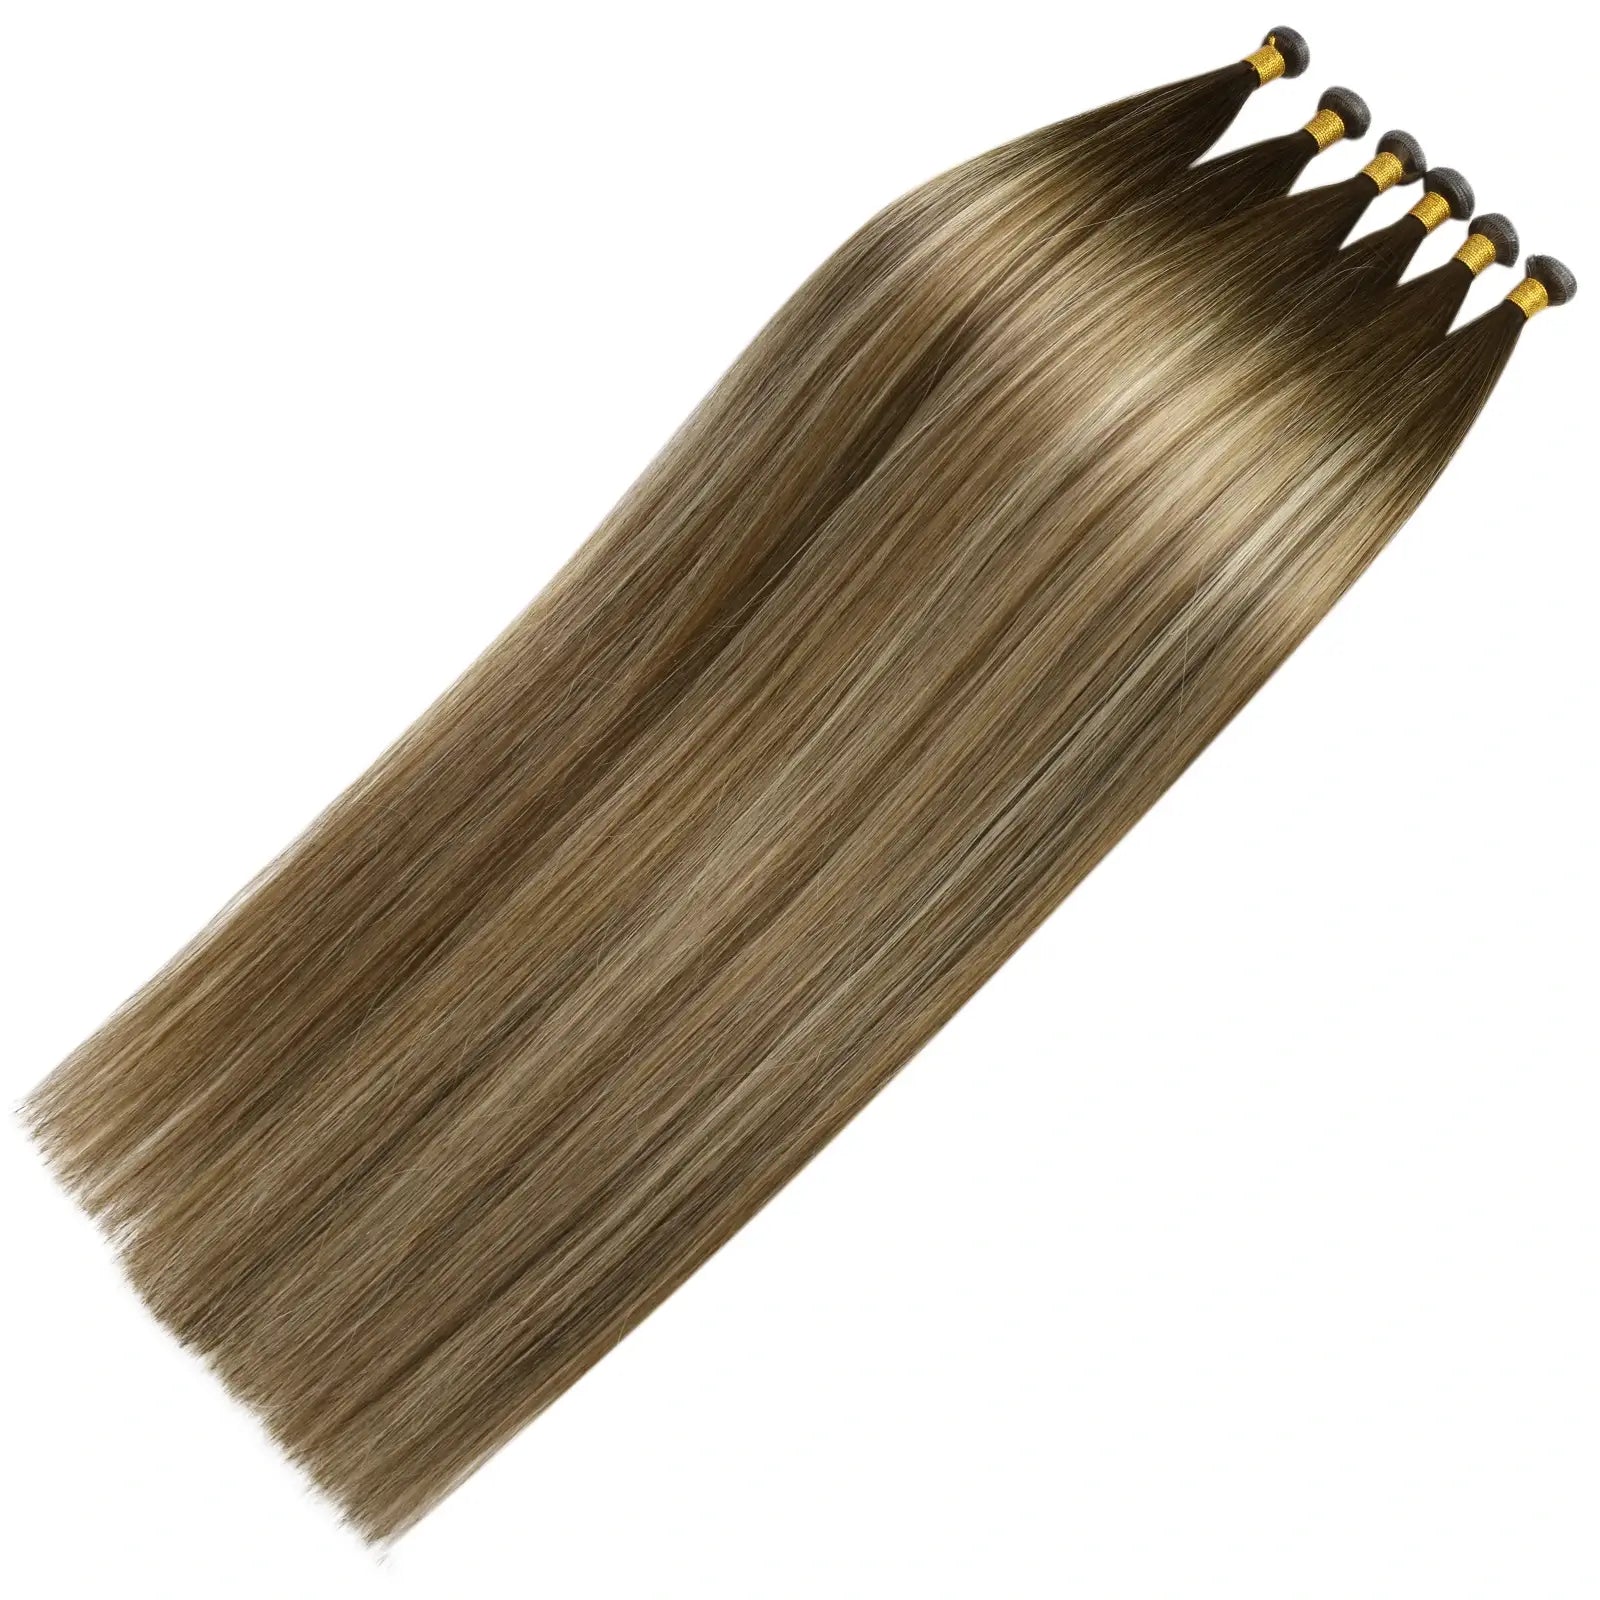 Genius Weft Extensions Human Hair Balayage Brown With Blonde